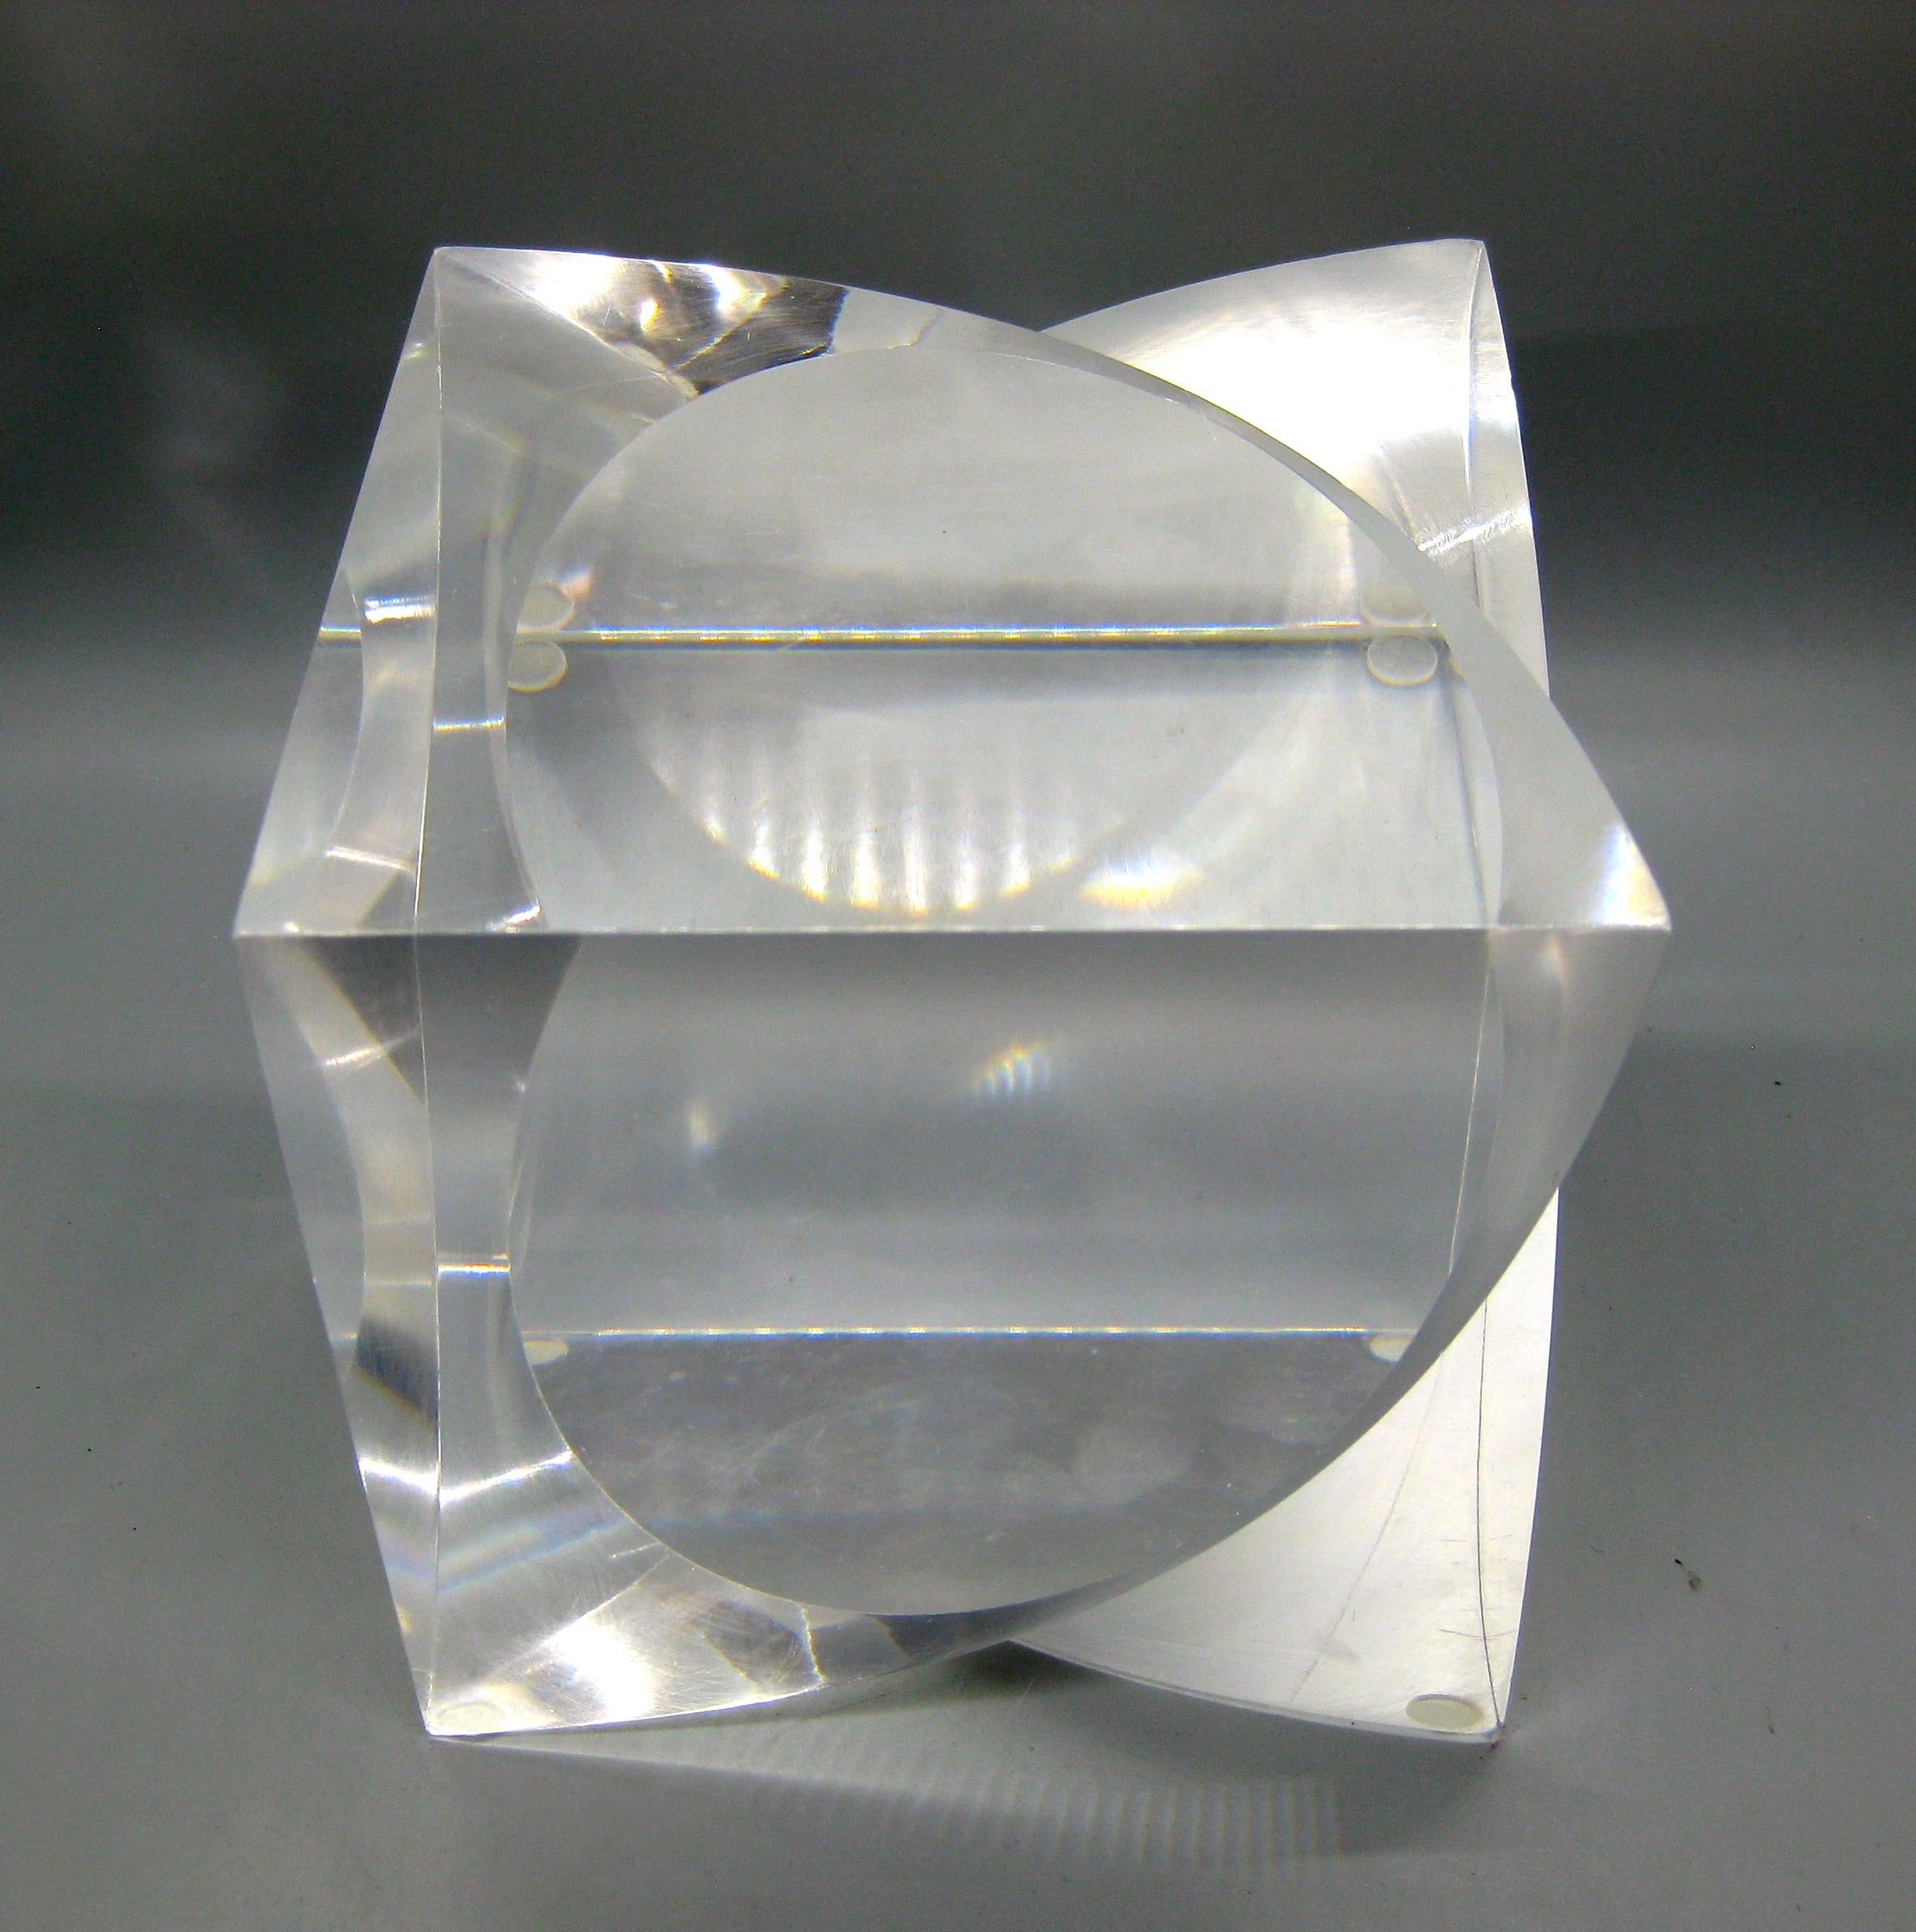 One of a kind Op-Art lucite acrylic abstract cube sculpture dating from the 1960's to 9170's. No signatures or maker marks. Reminds me of Charles Hollis Jones or Victor Vasarely. Great abstract design and form. The sculpture is in nice original